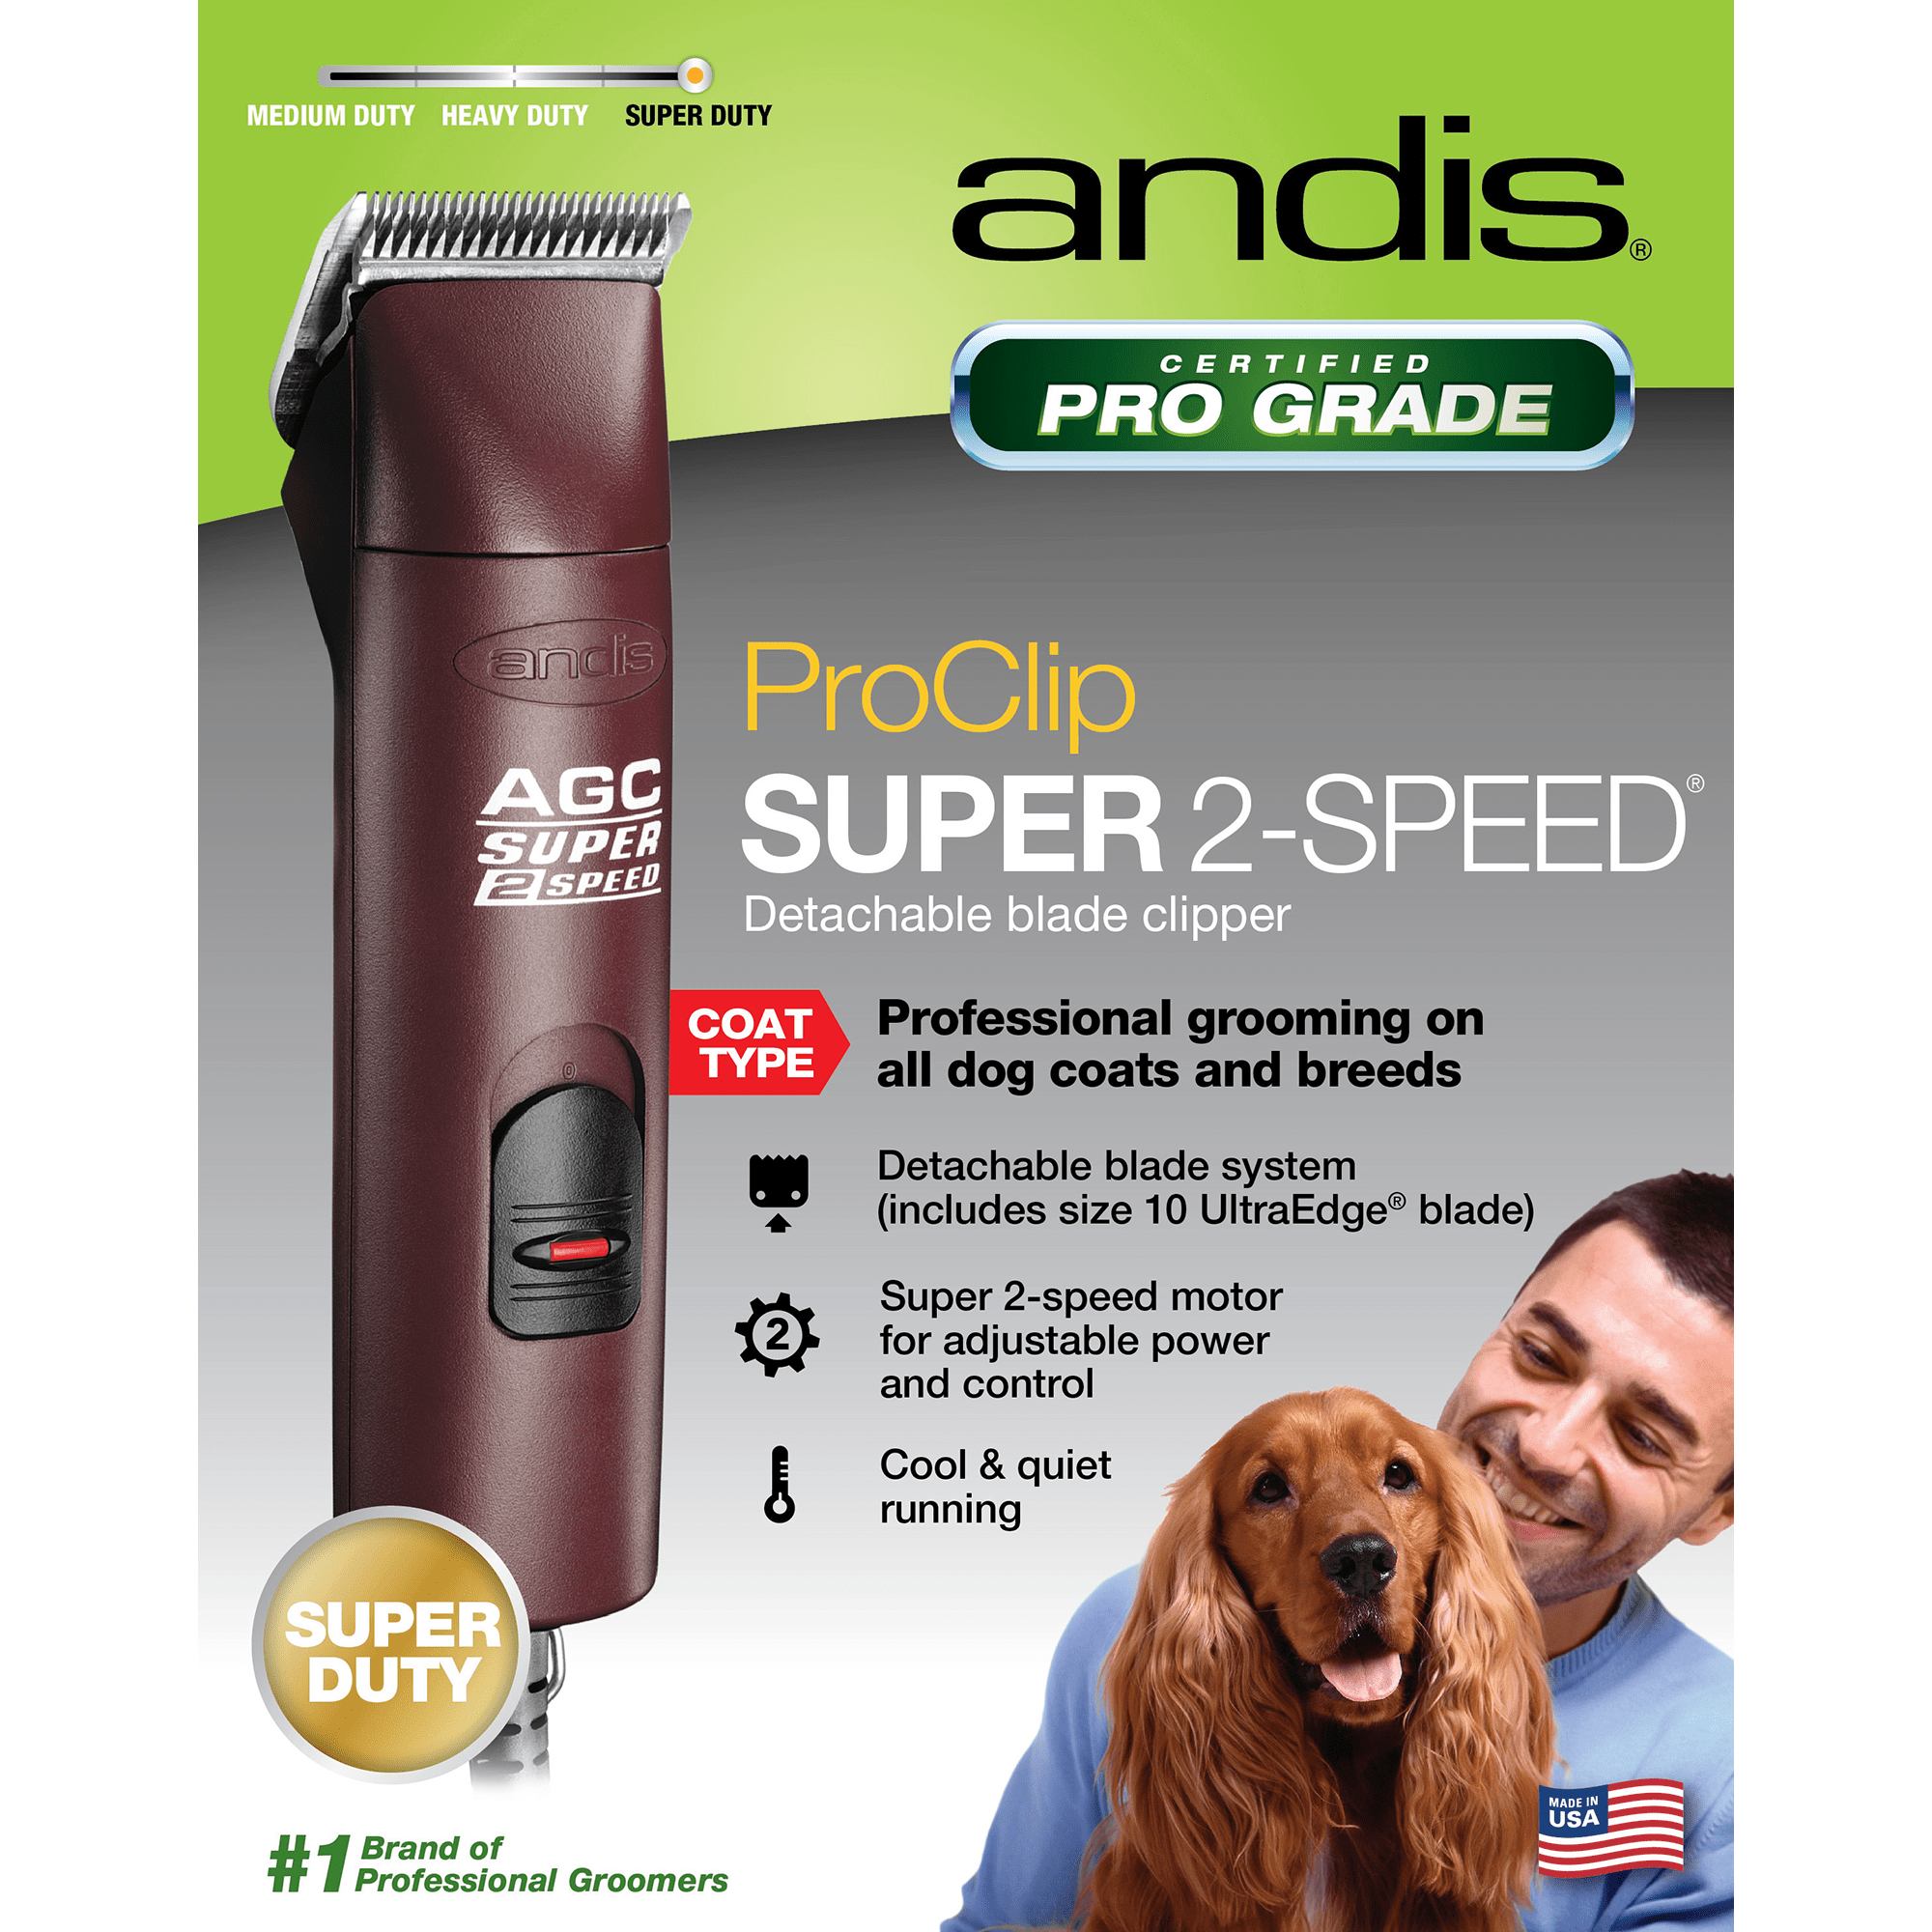 Andis AGC2 Super 2-Speed Professional Clipper with Detachable Blade | Petco $139.42